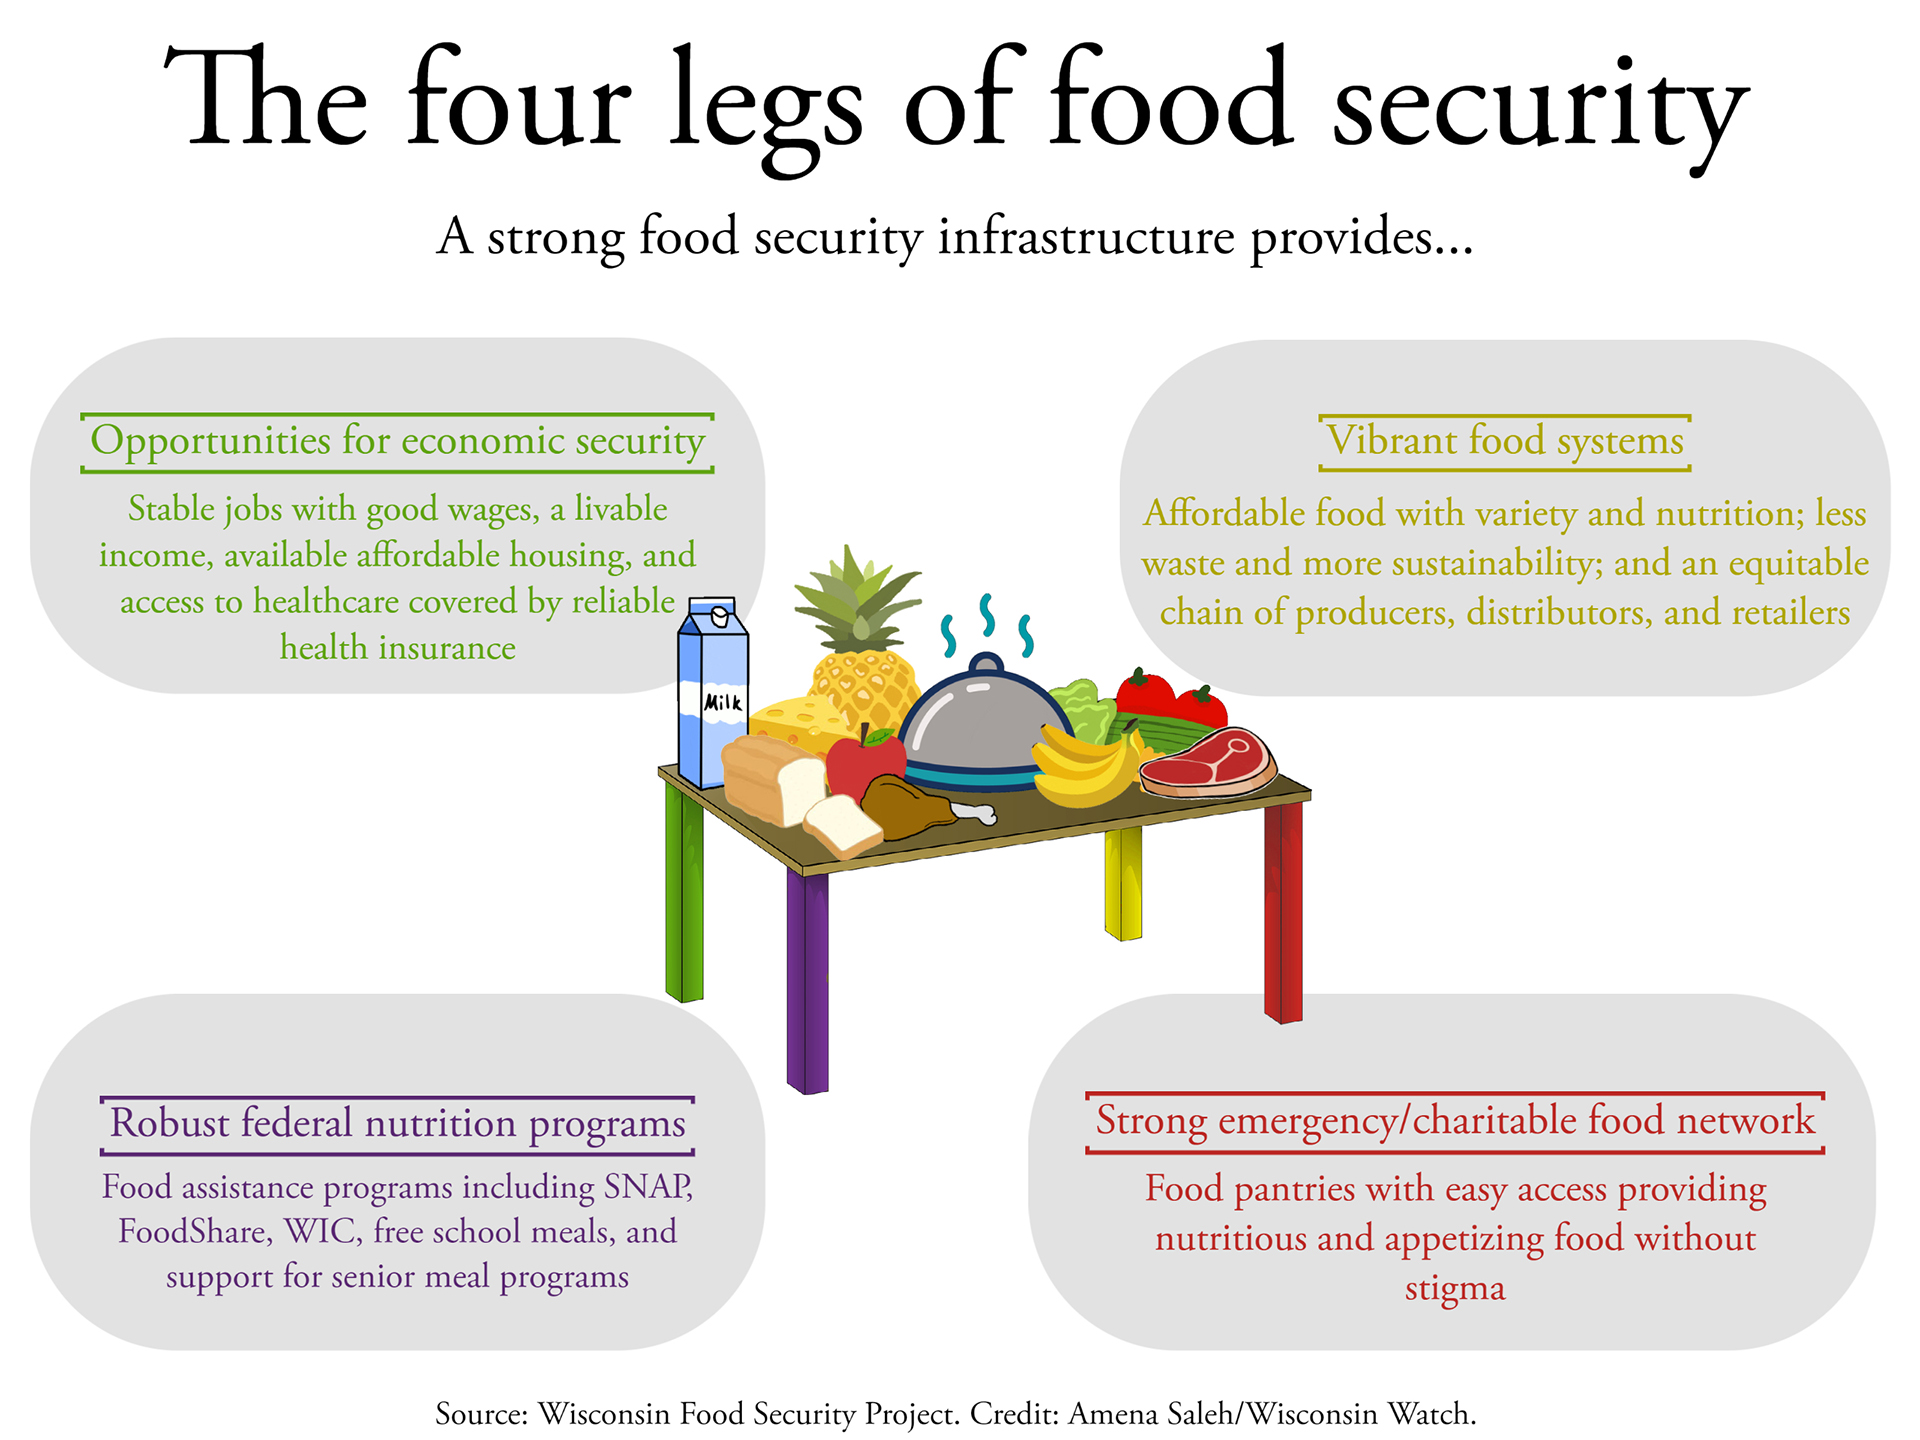 An infographic with the title "The four legs of food security" indicates that "A strong food security infrastructure provides..." with four elements: Opportunities for economic security, vibrant food systems, strong emergency/charitable food networks and robust federal nutrition programs.